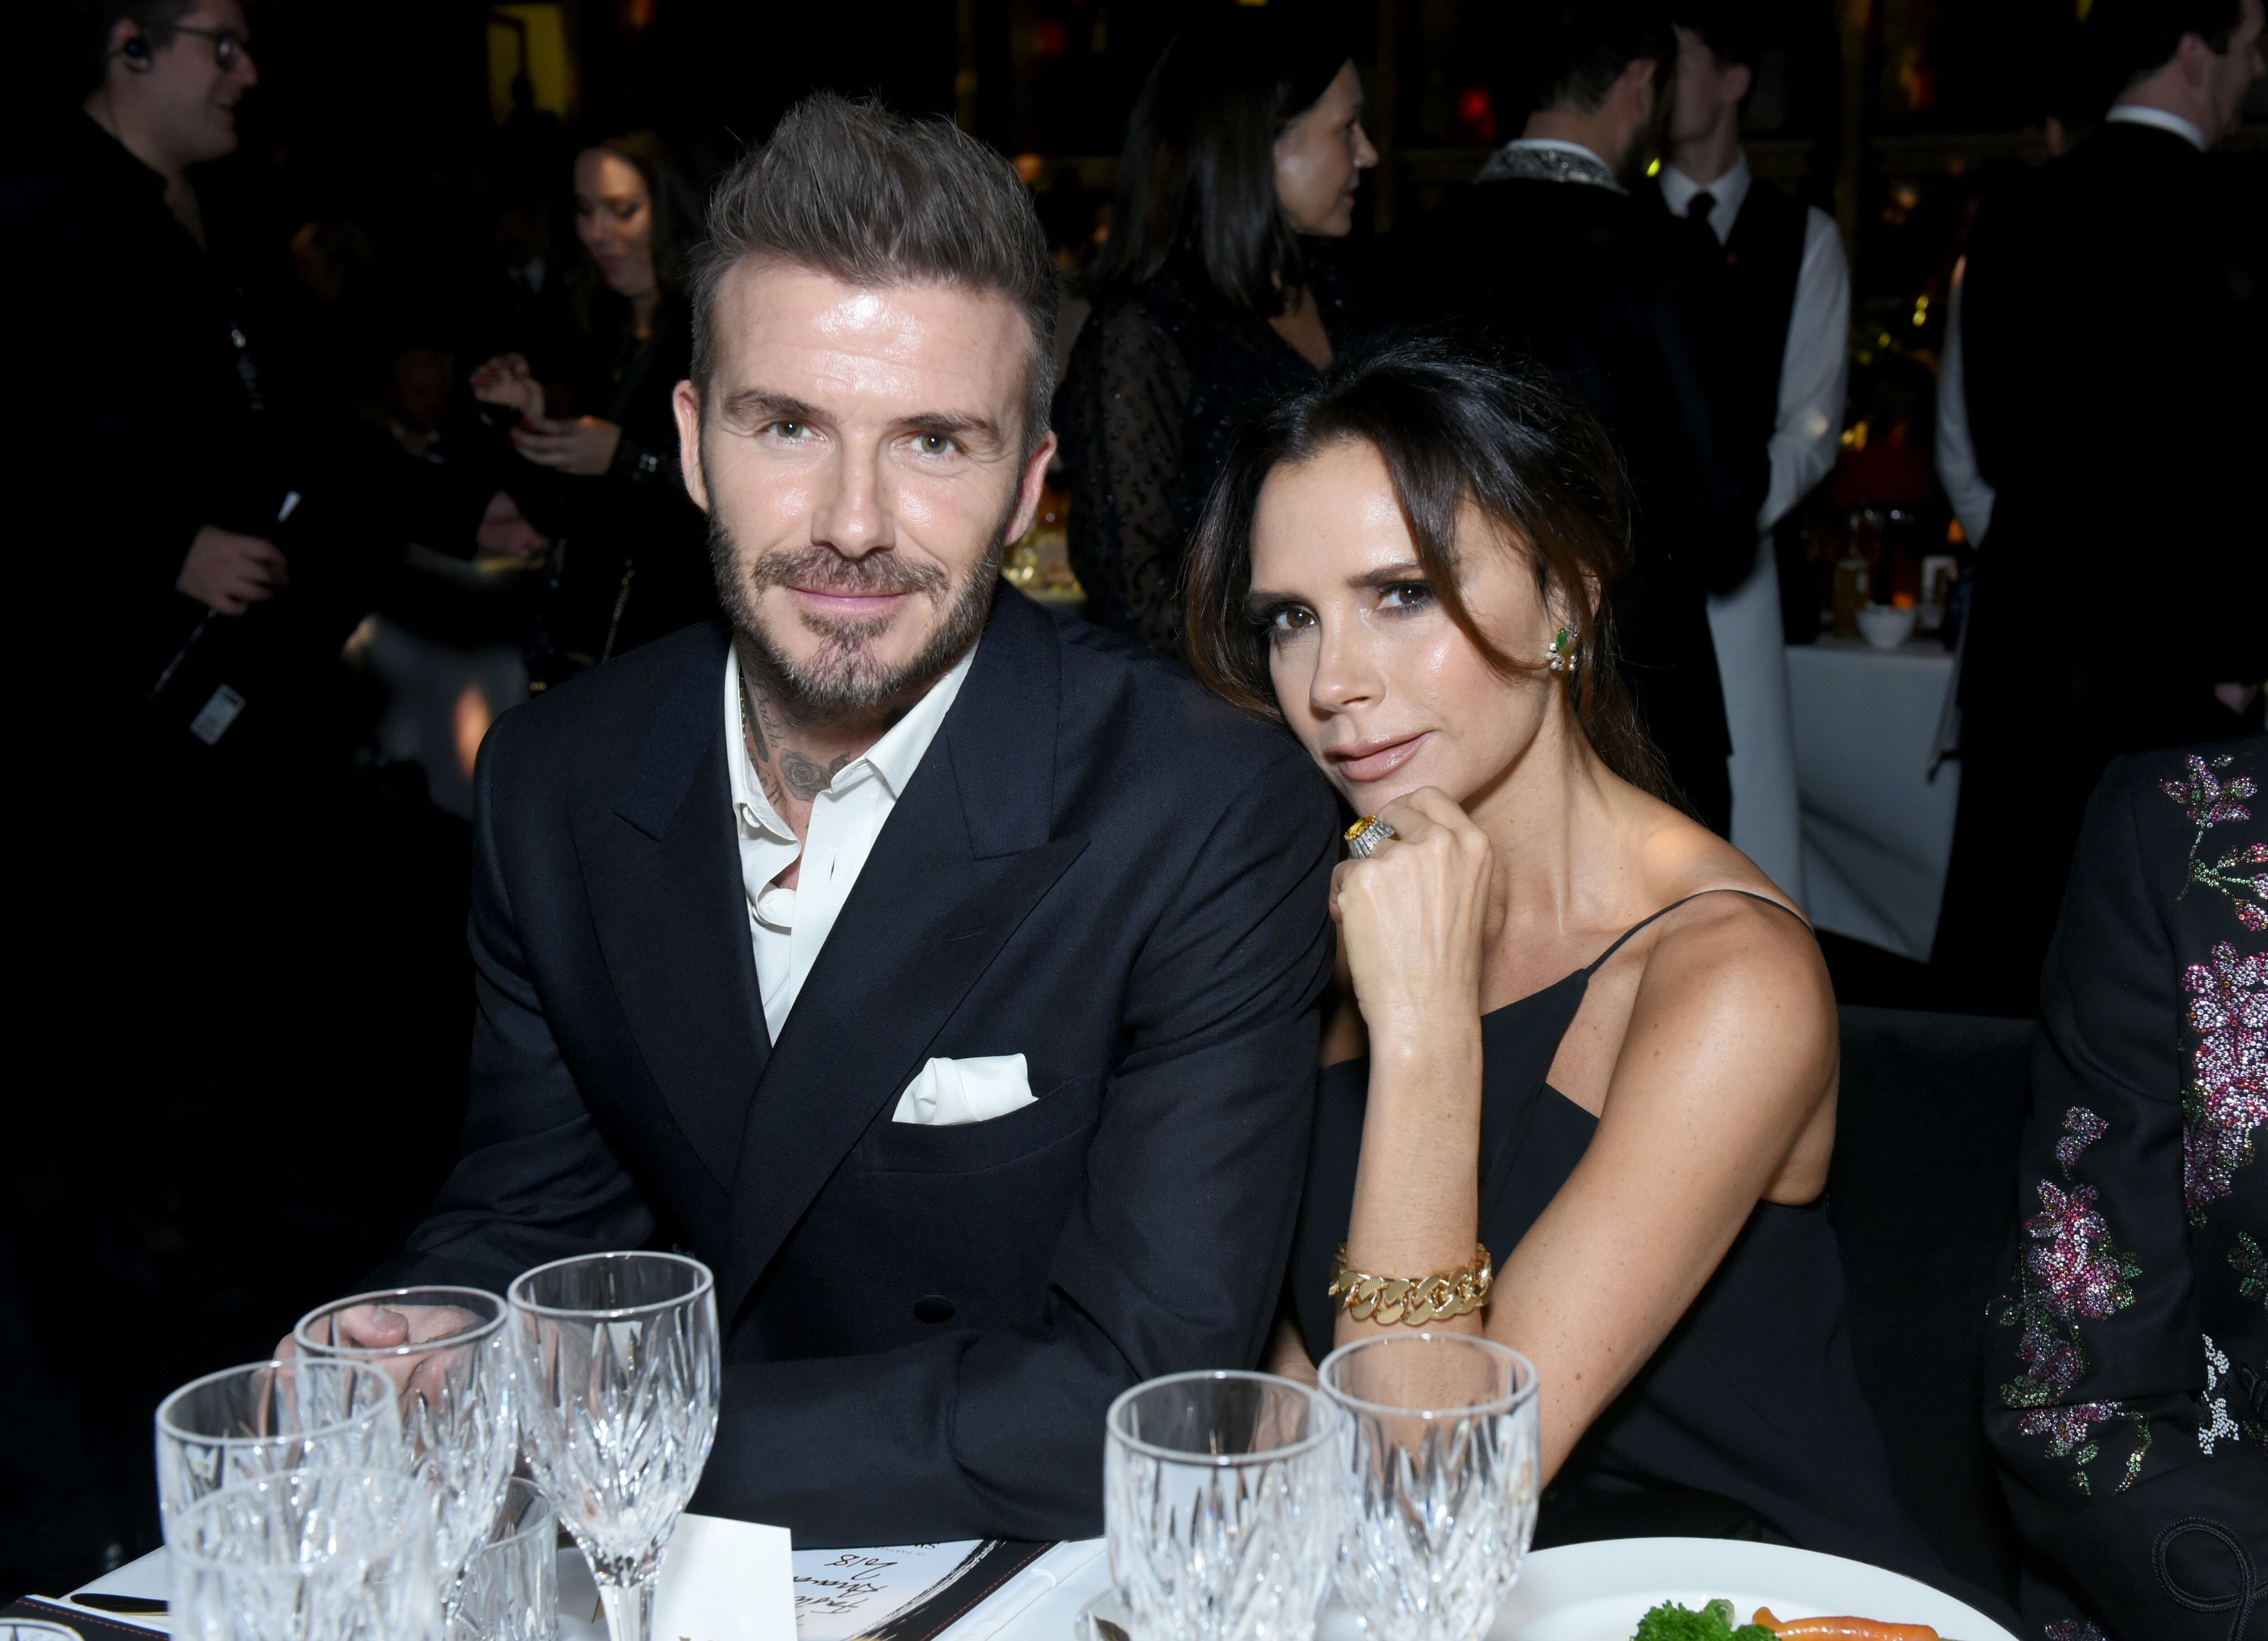 David Beckham and Victoria Beckham attend The Fashion Awards 2018 In Partnership With Swarovski. | Source: Getty Images